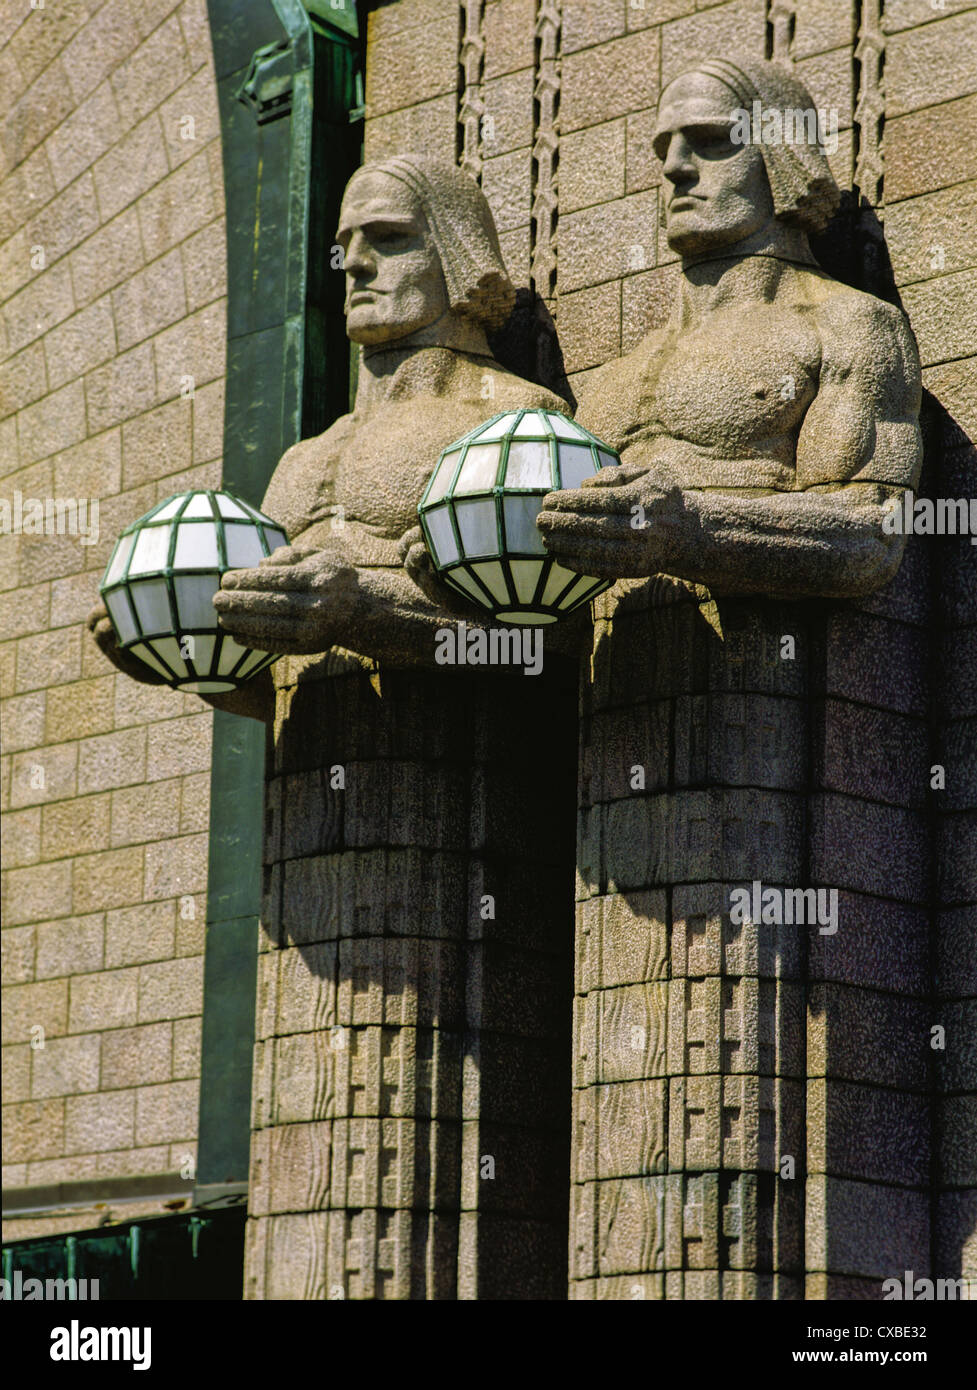 Granite statues holding lamps designed by Emil Wikstrom outside the Central Railway Station in Helsinki, Finland Stock Photo